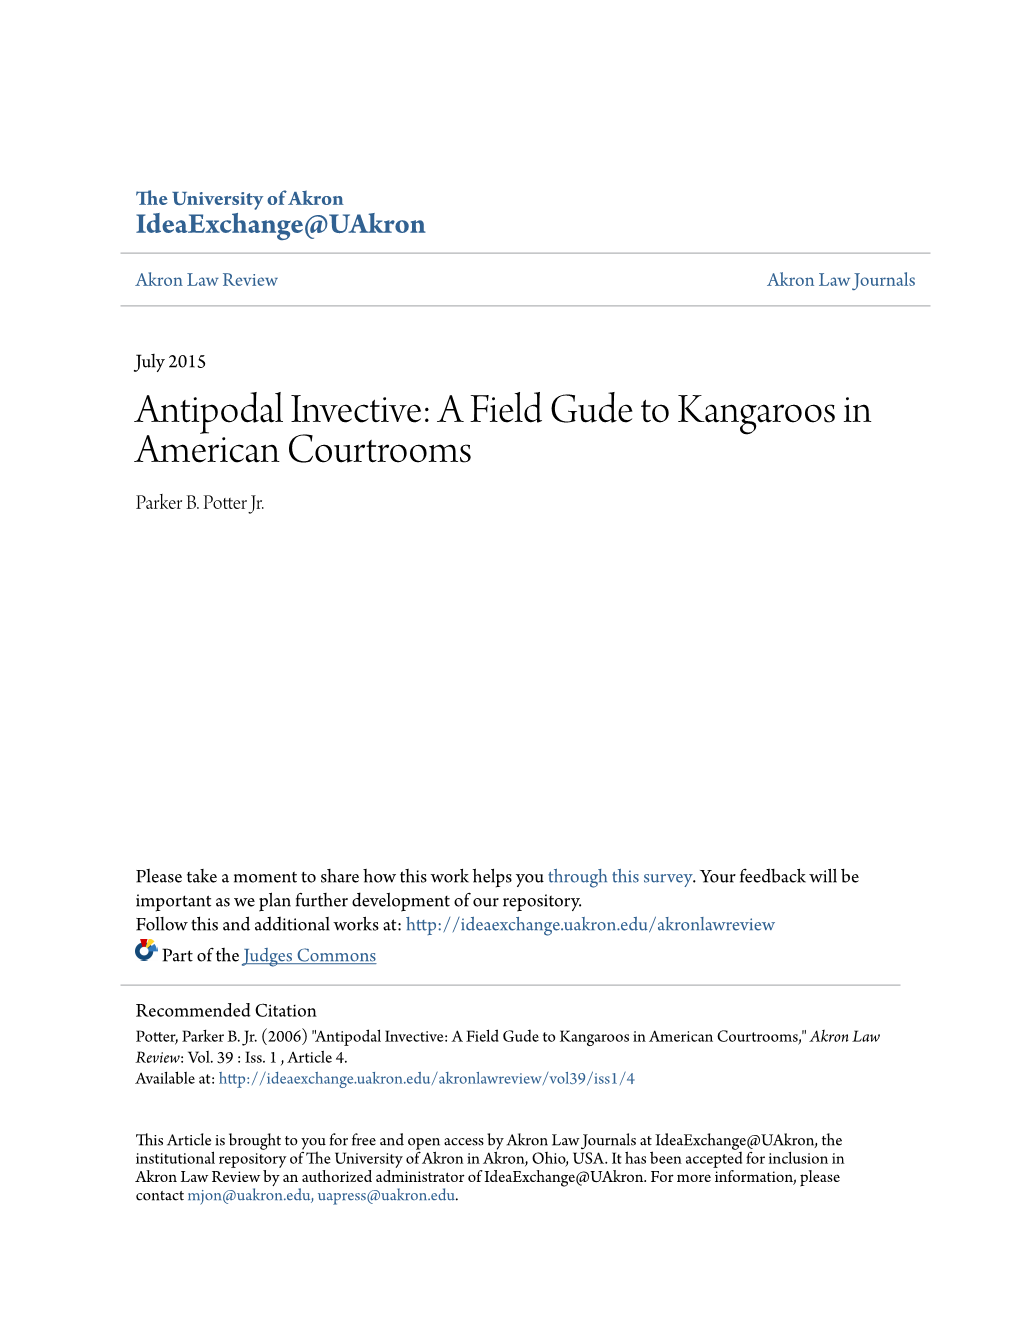 Antipodal Invective: a Field Gude to Kangaroos in American Courtrooms Parker B